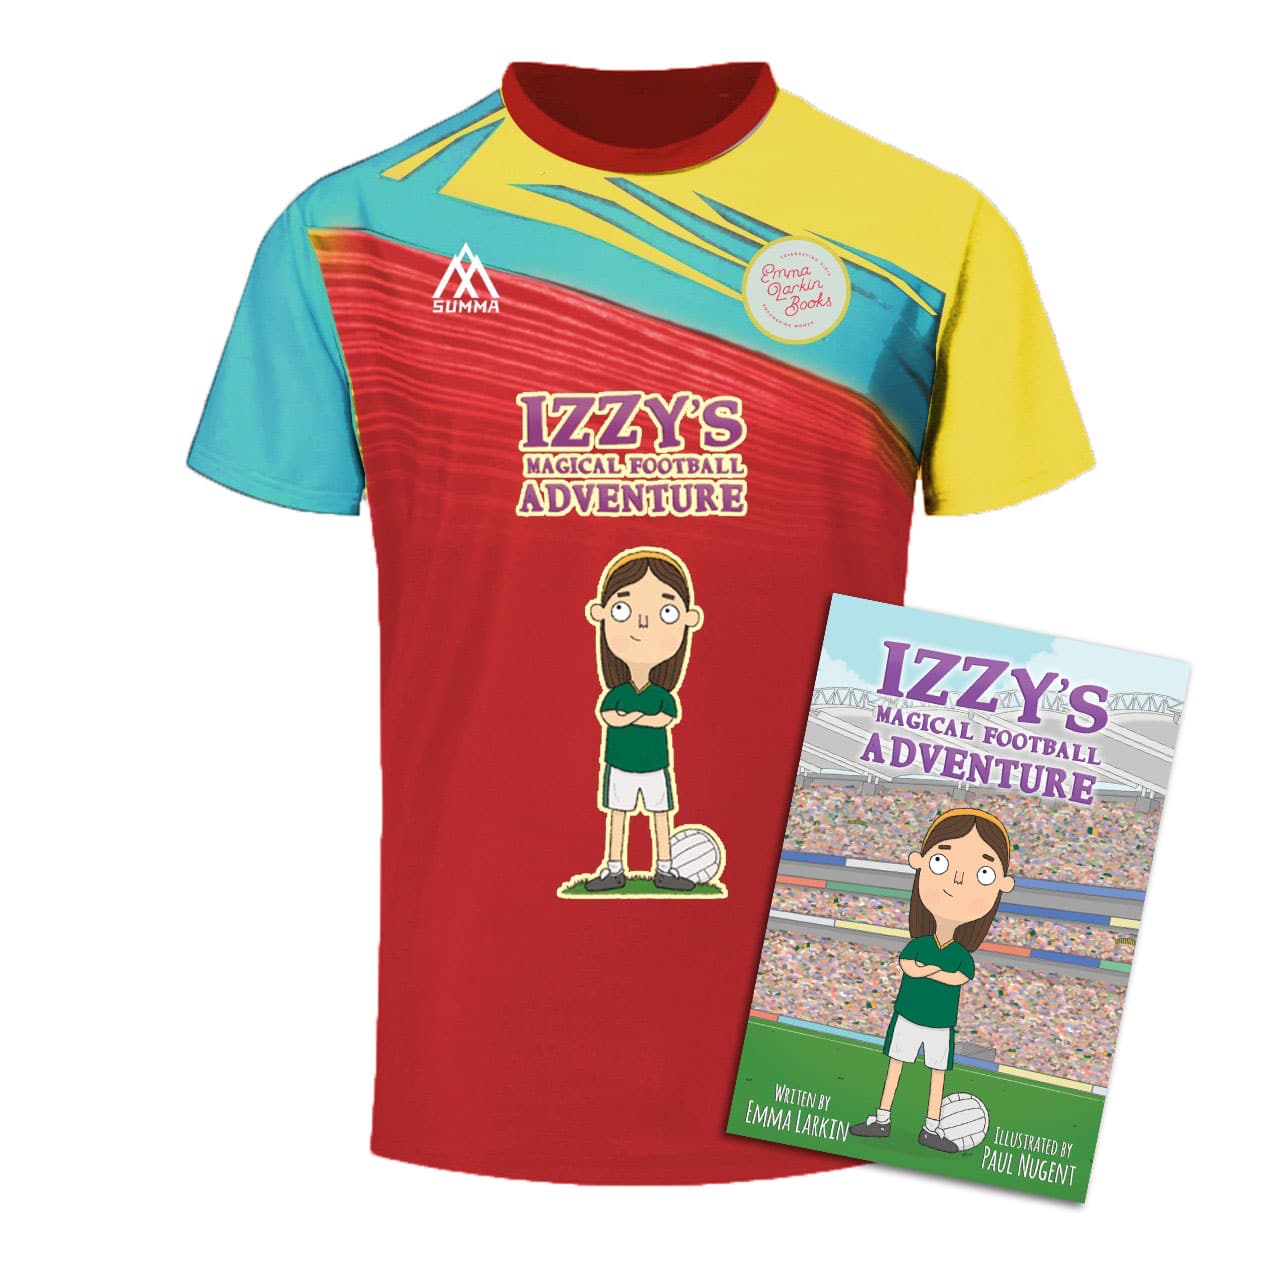 Training Tops and Books Bundle Football